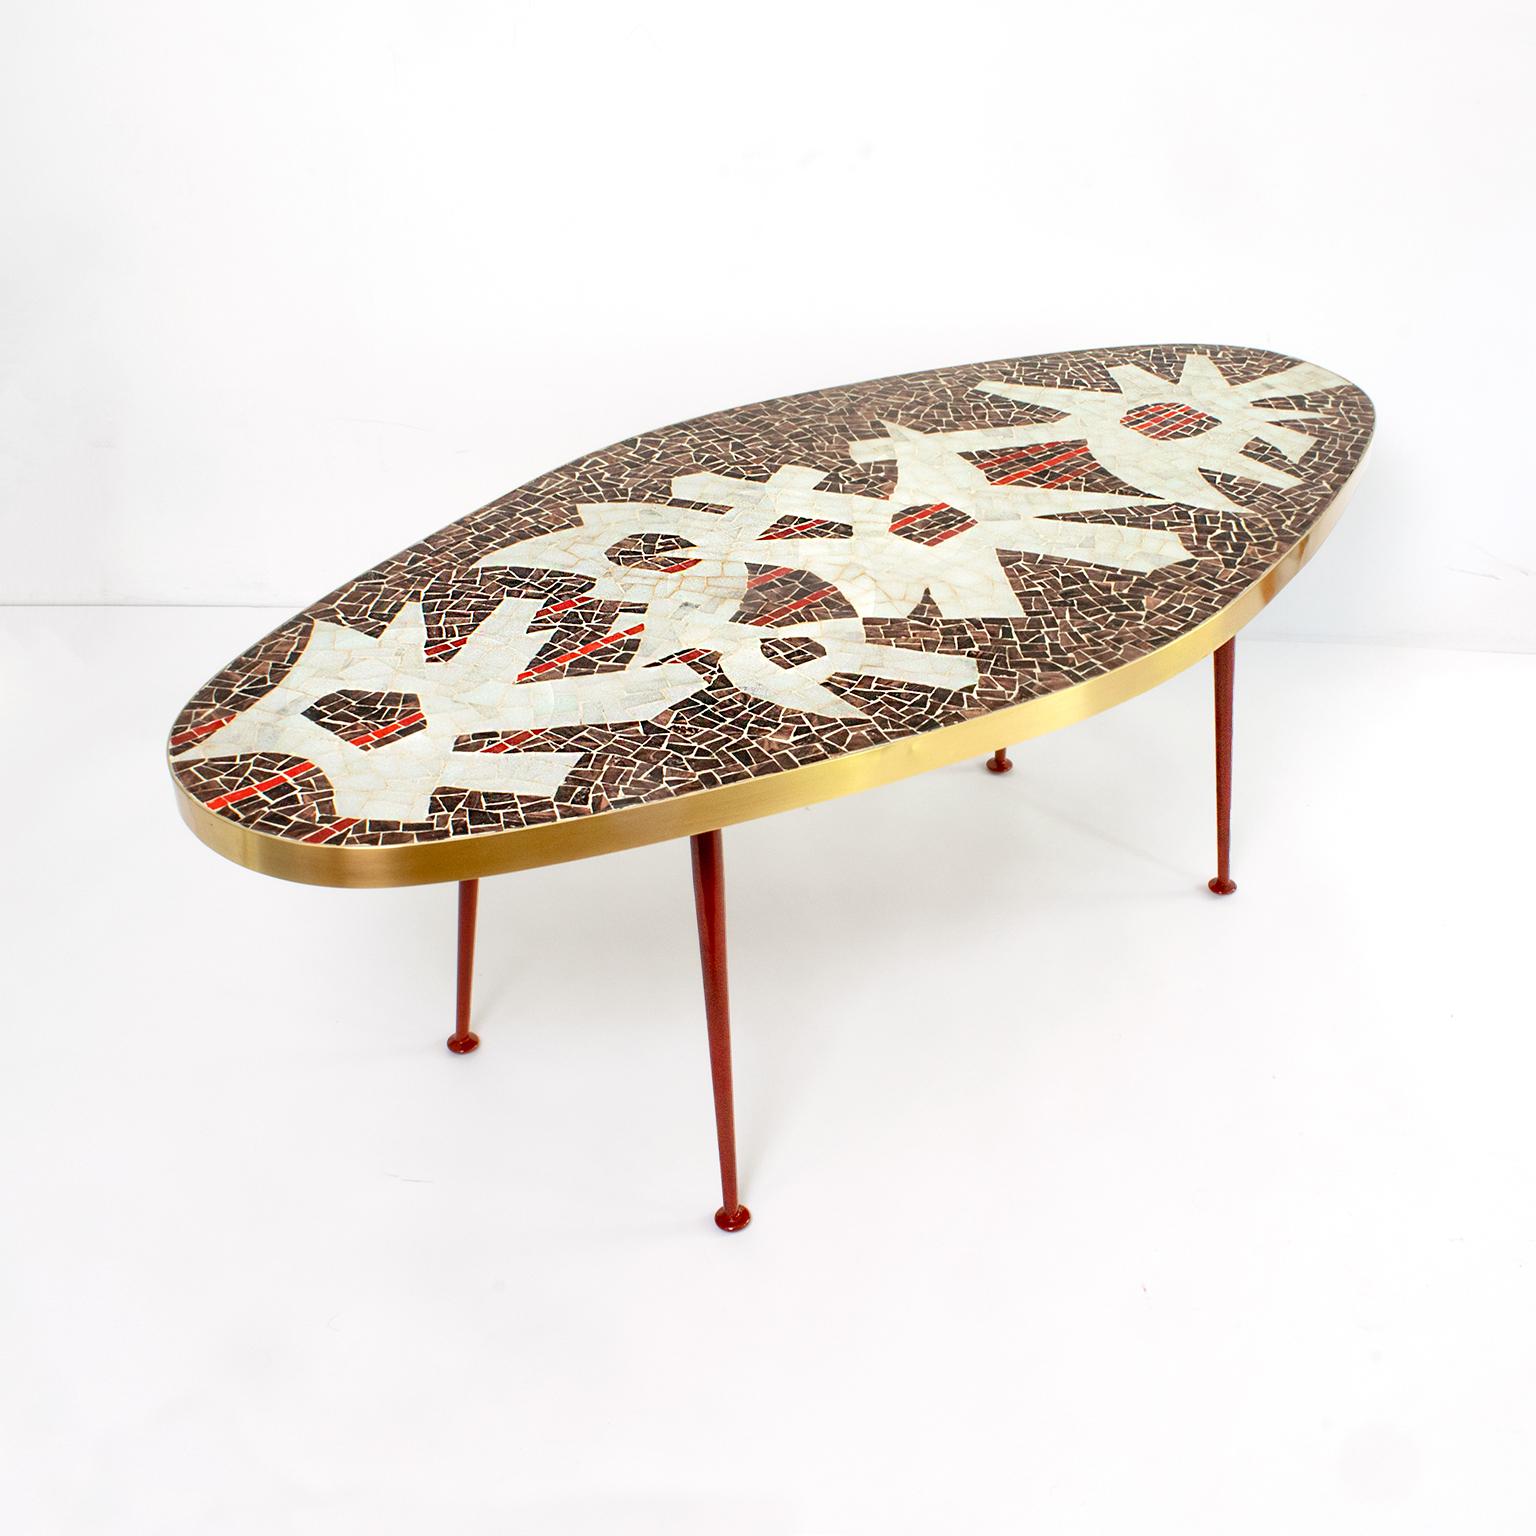 Oval shaped mosaic coffee table with abstract design and a polished brass band edge with four red lacquered legs attributed to Berthold Müller, Germany, 1960.
Newly restored.